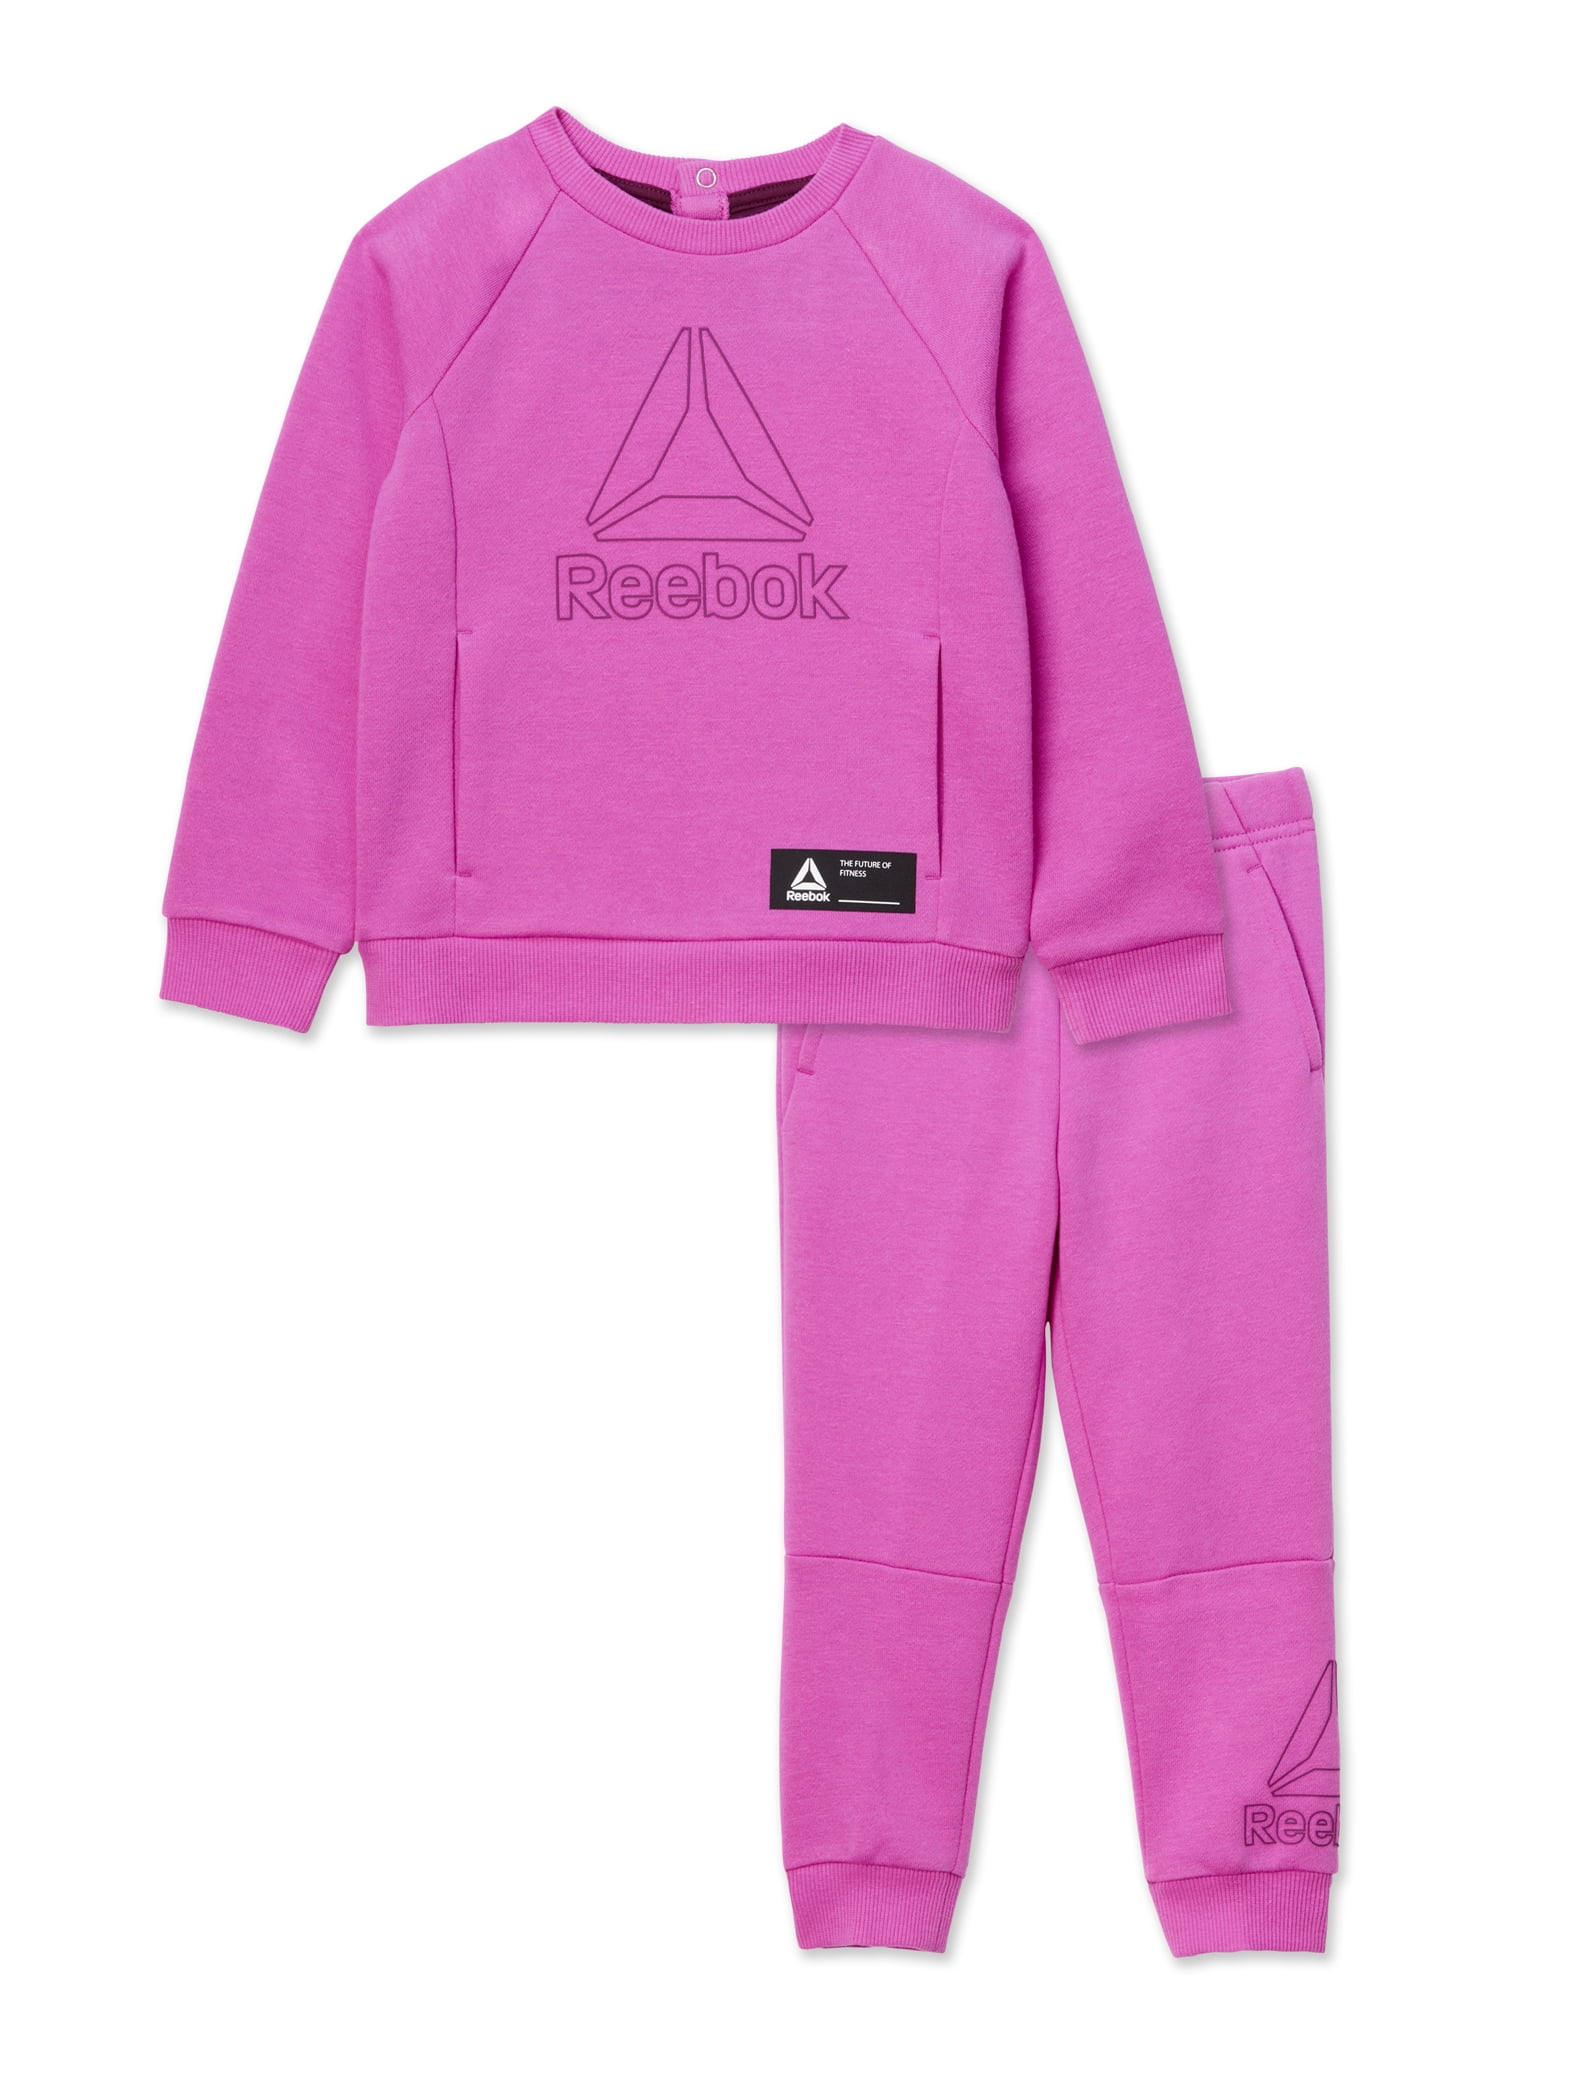 Reebok Toddler Girls Game On Pullover Crew And Jogger Set, 2-Piece